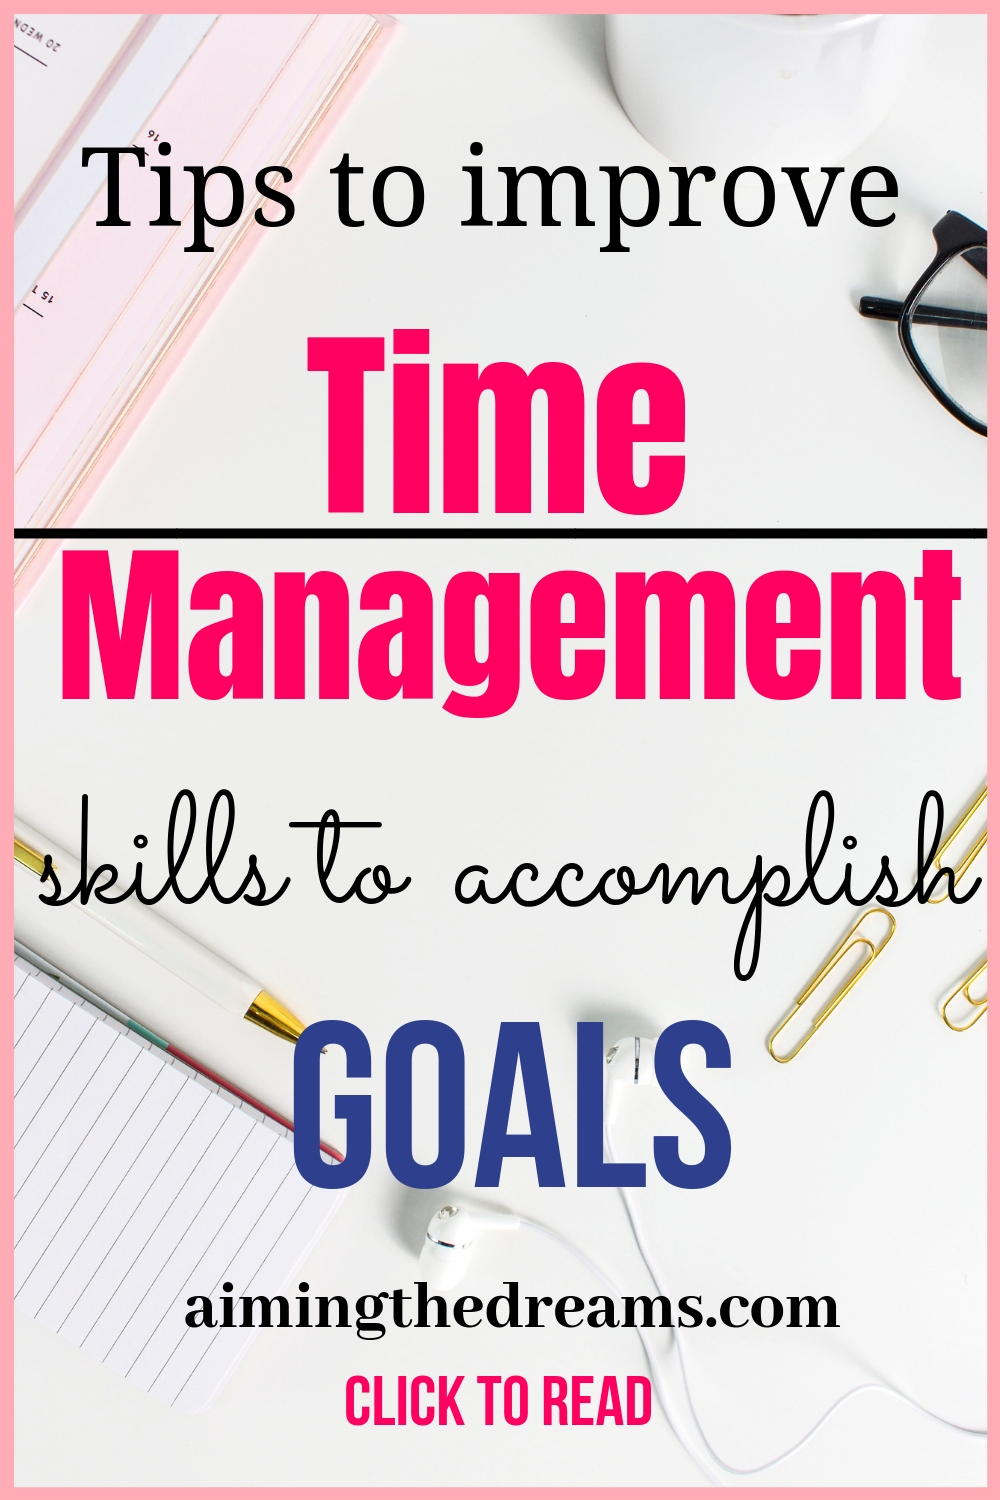  Tips to improve Time management skills to accomplish goals. 